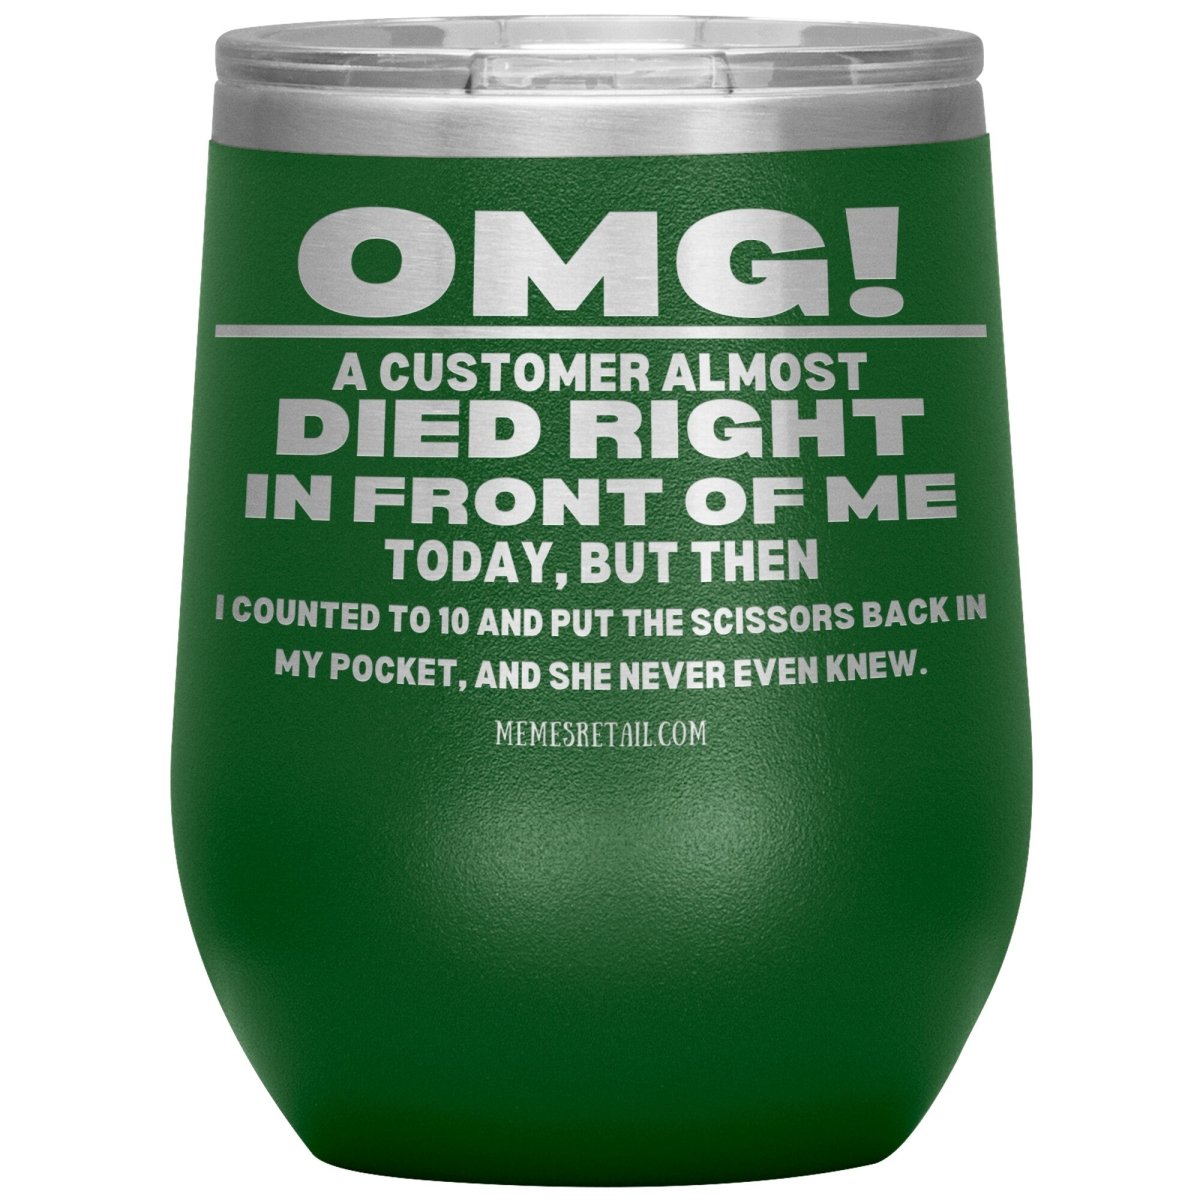 OMG! A Customer Almost Died Right In Front Of Me Tumbler, 12oz Wine Insulated Tumbler / Green - MemesRetail.com